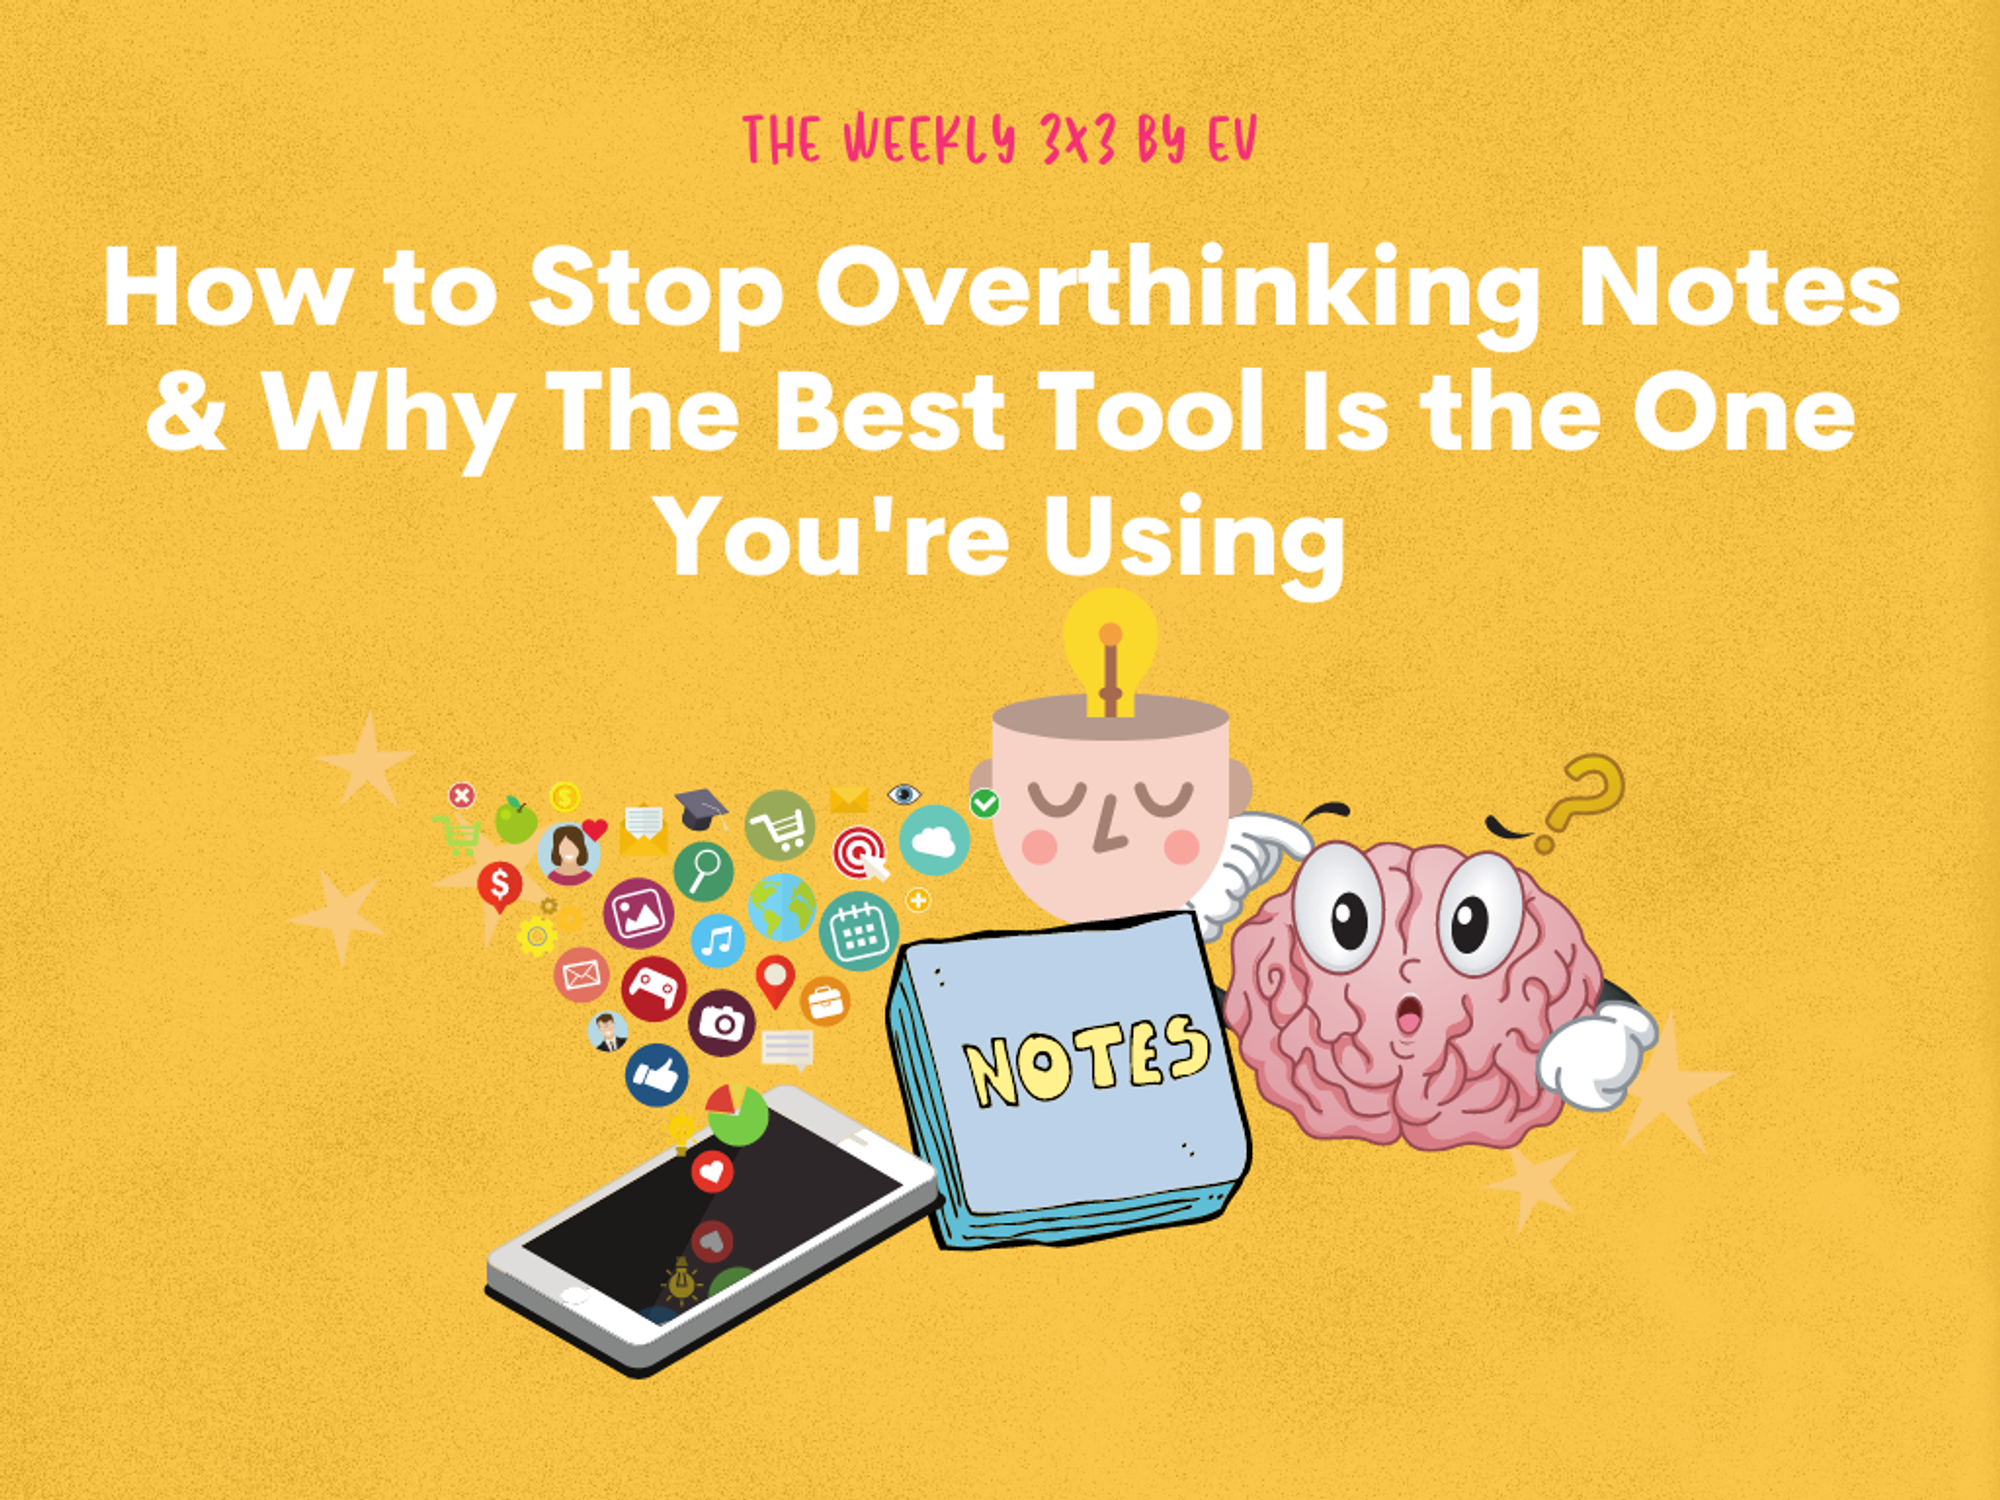 How to Stop Overthinking Notes & Why The Best Tool Is the One You're Using